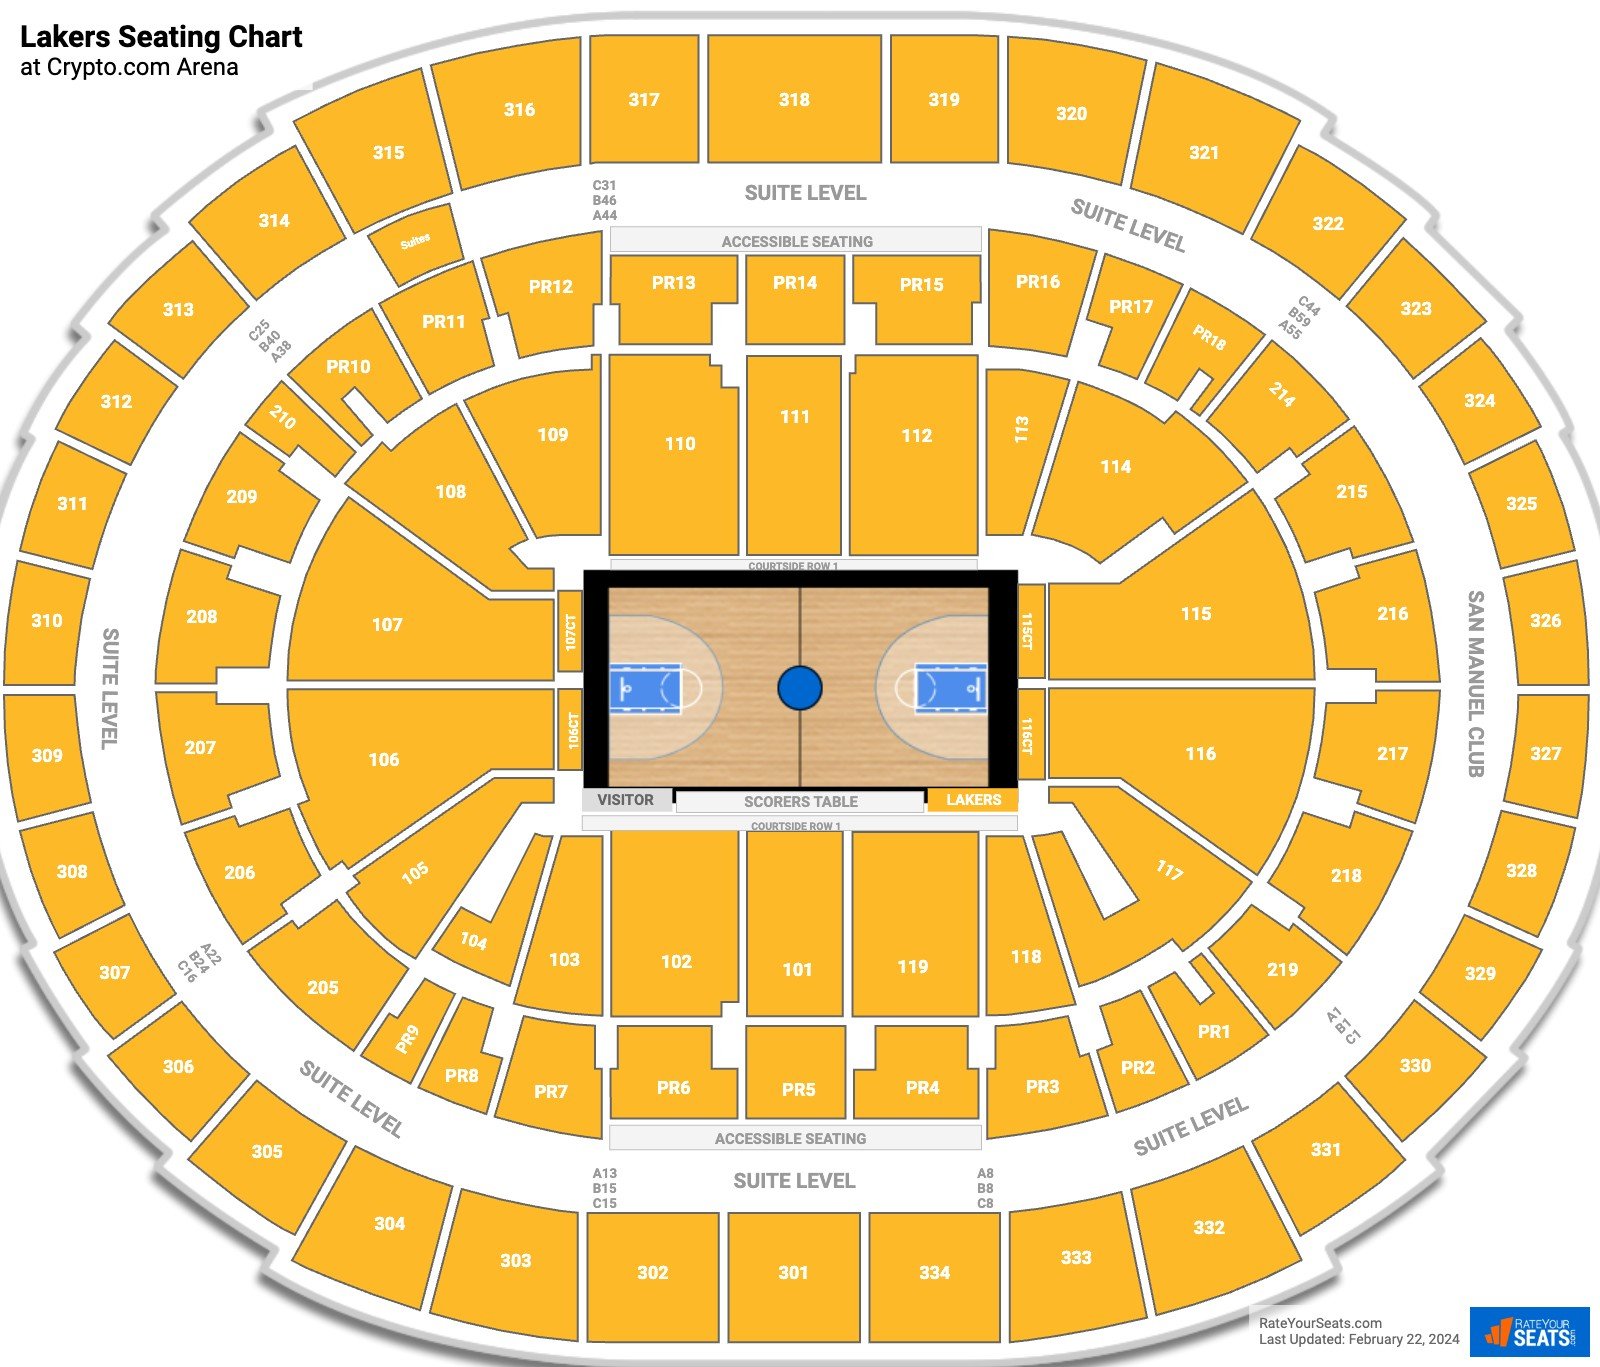 Staples Center Interactive Seating Chart Lakers | Cabinets Matttroy